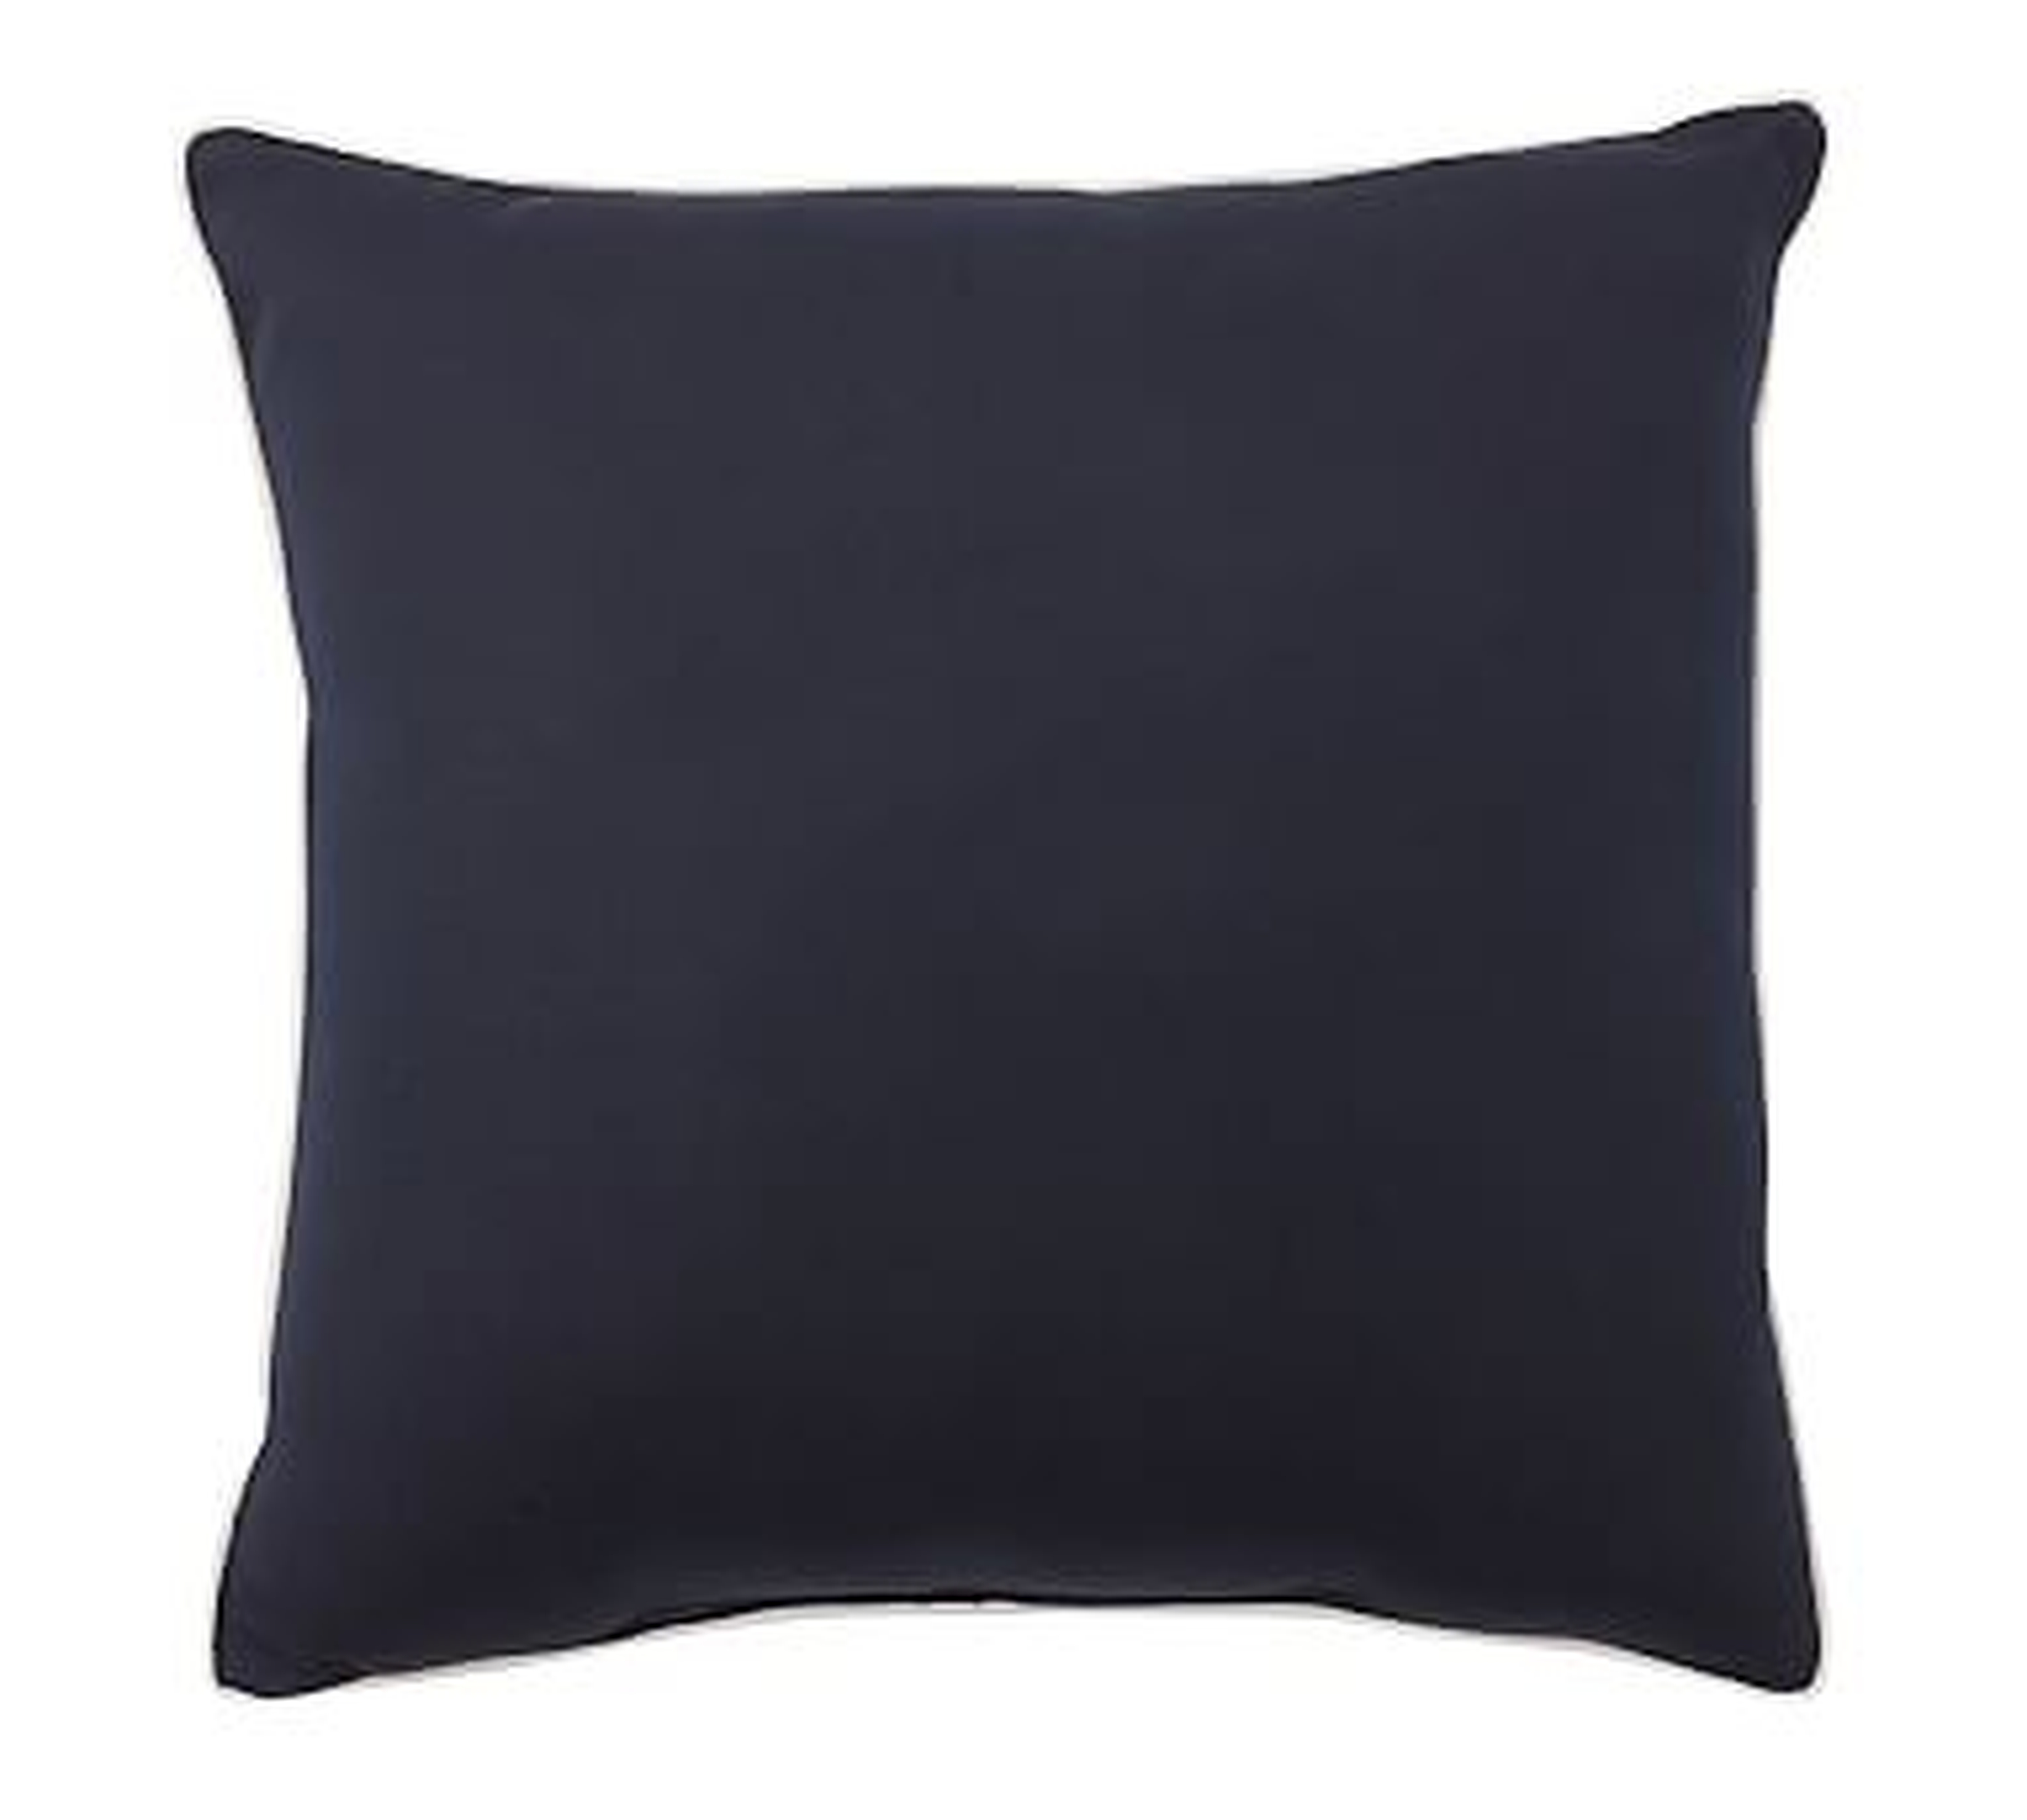 Contrast Piped Solid Indoor/Outdoor Pillow, 18" x 18", Navy - Pottery Barn